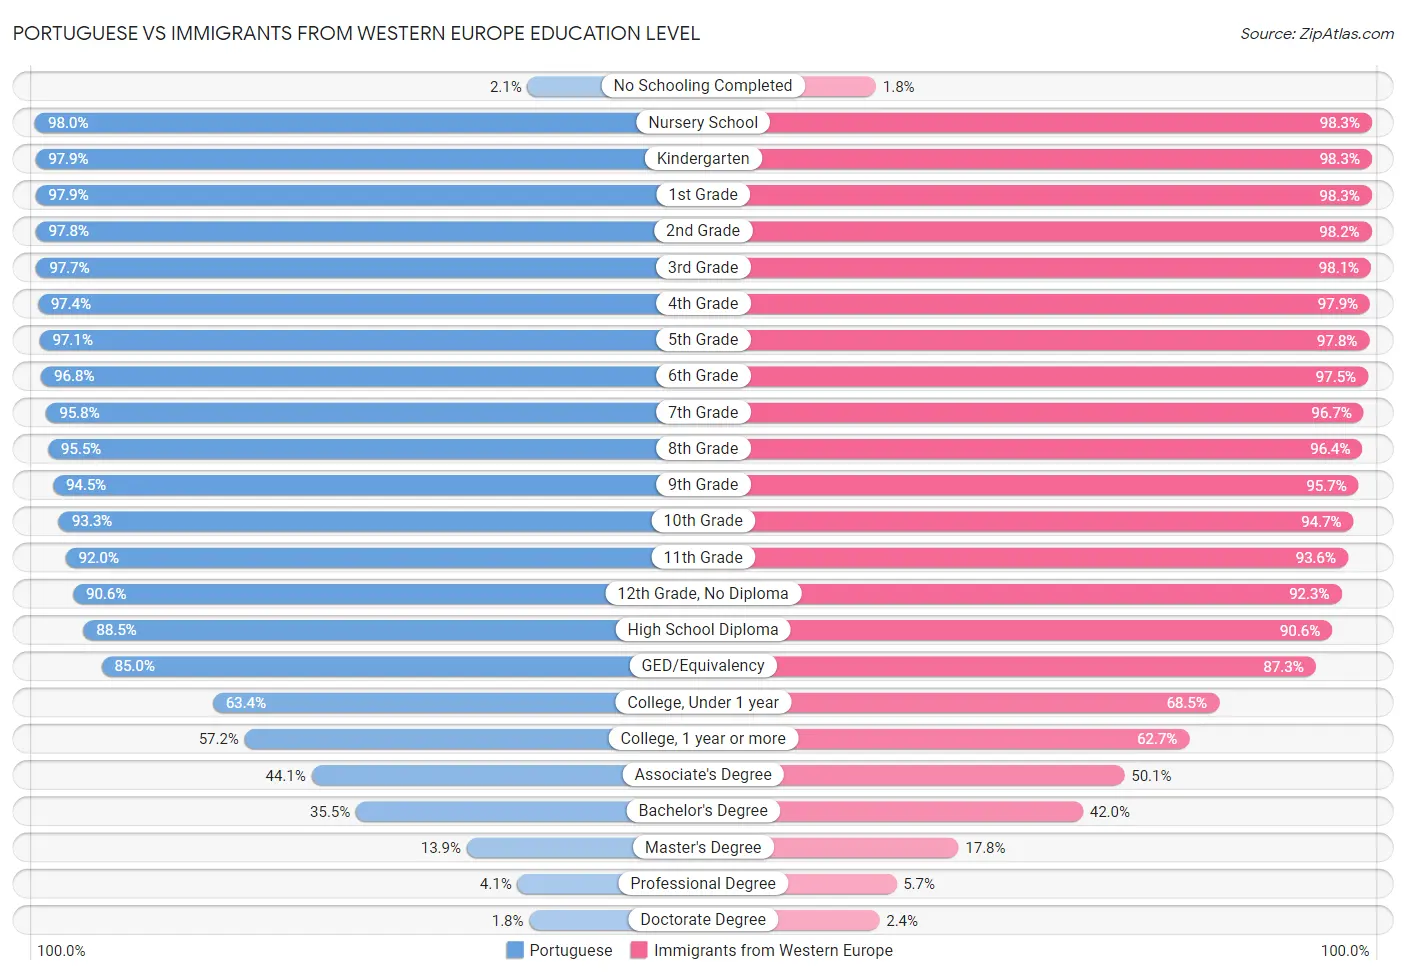 Portuguese vs Immigrants from Western Europe Education Level